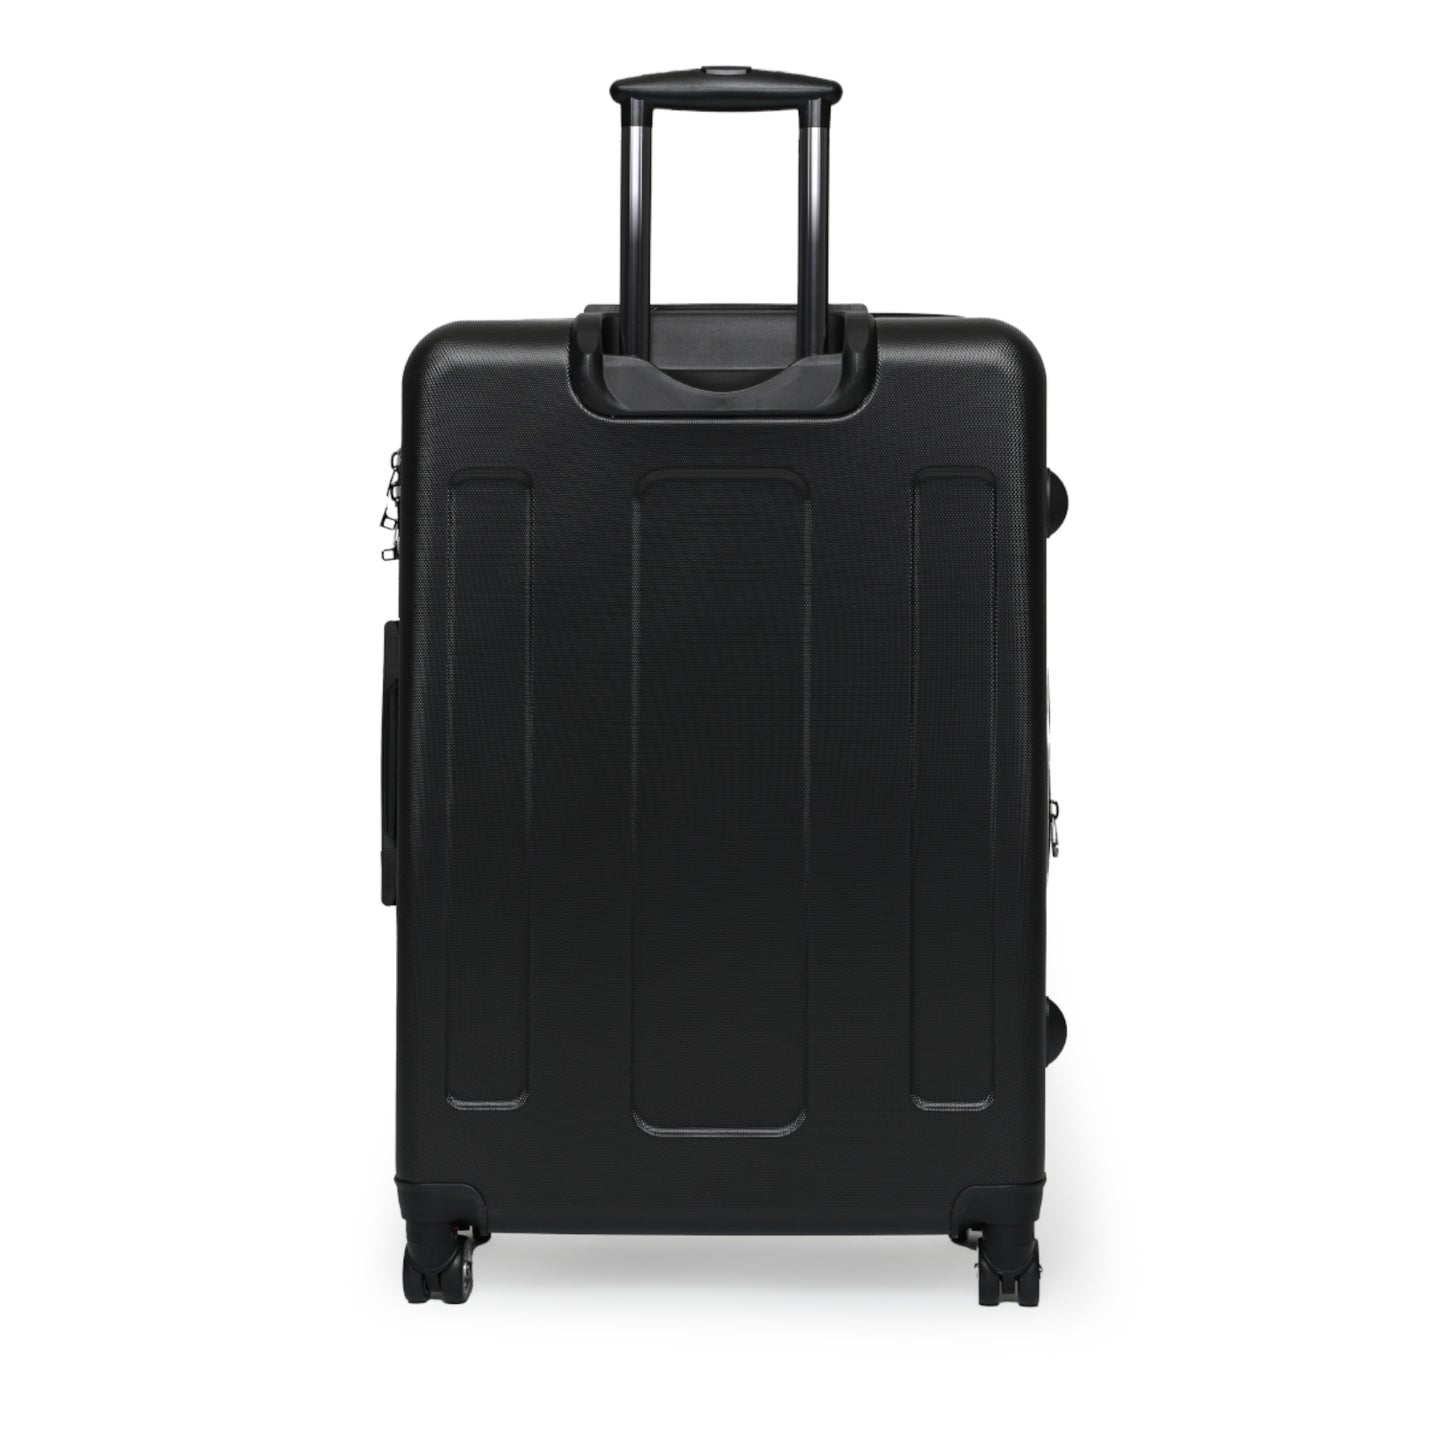 Suitcase: Your Ultimate Travel Companion in Style (KEEP CALM AND TRAVEL)